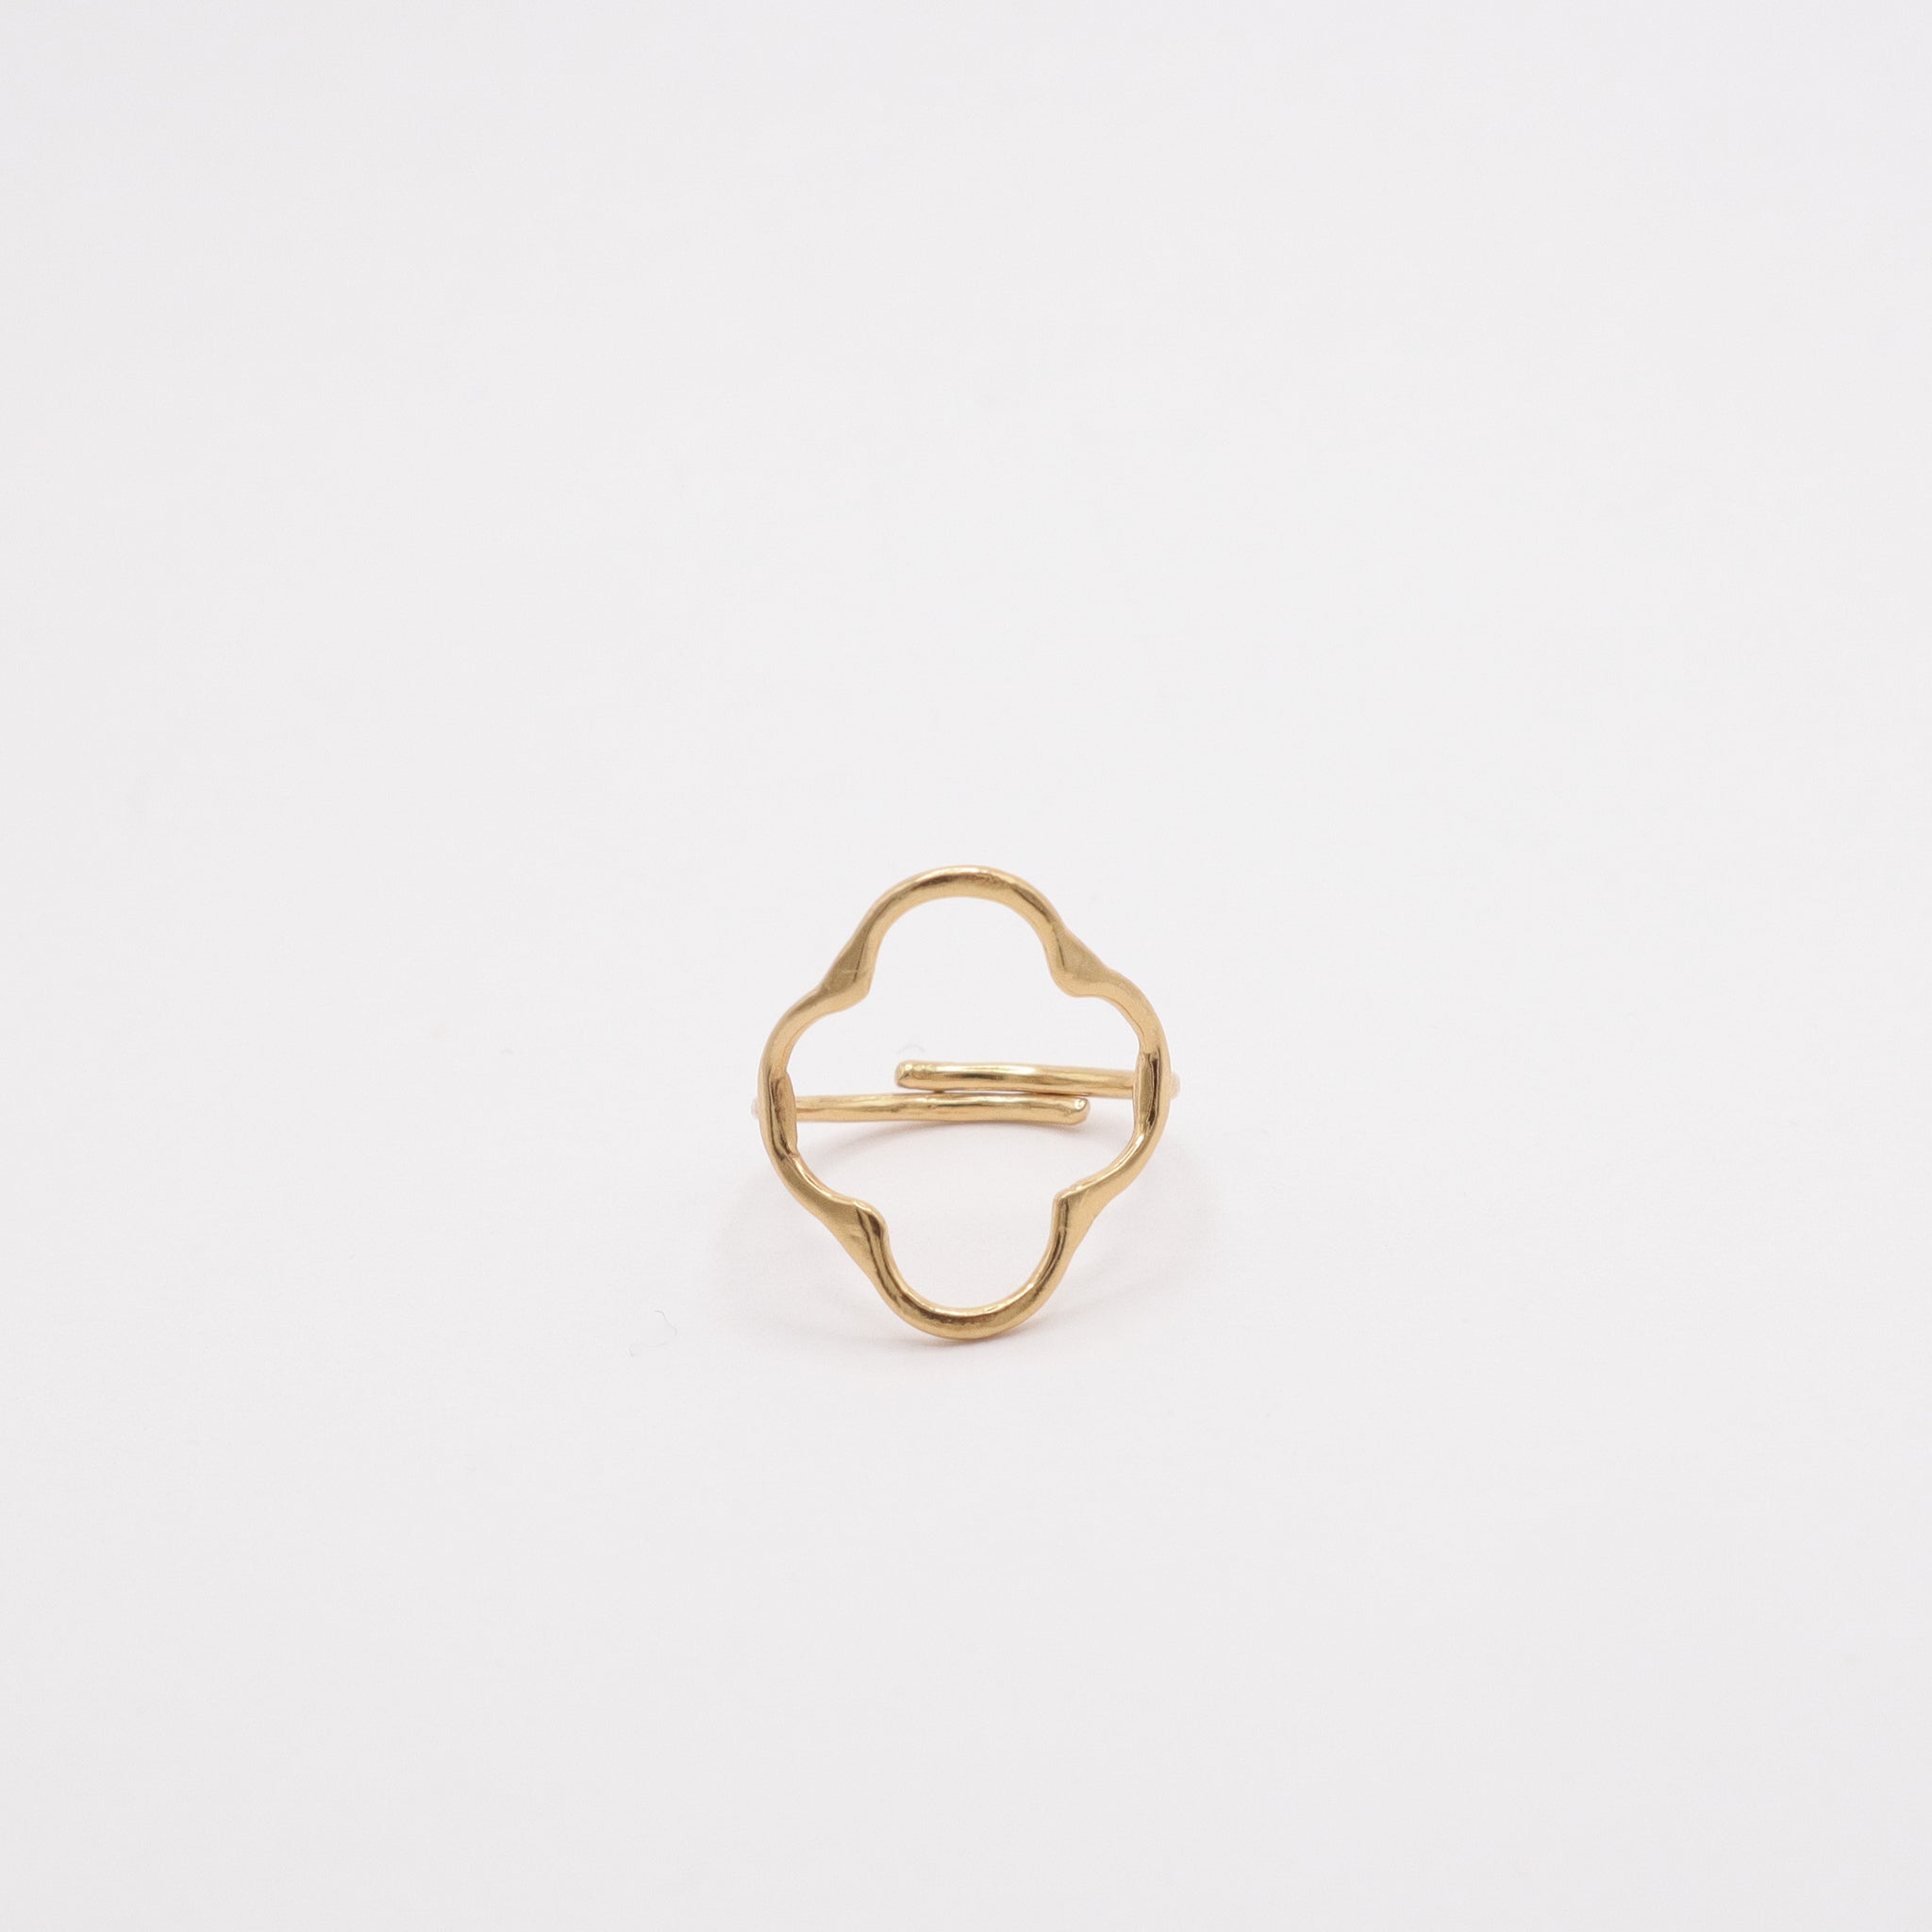 Gold Clover Ring, featured image